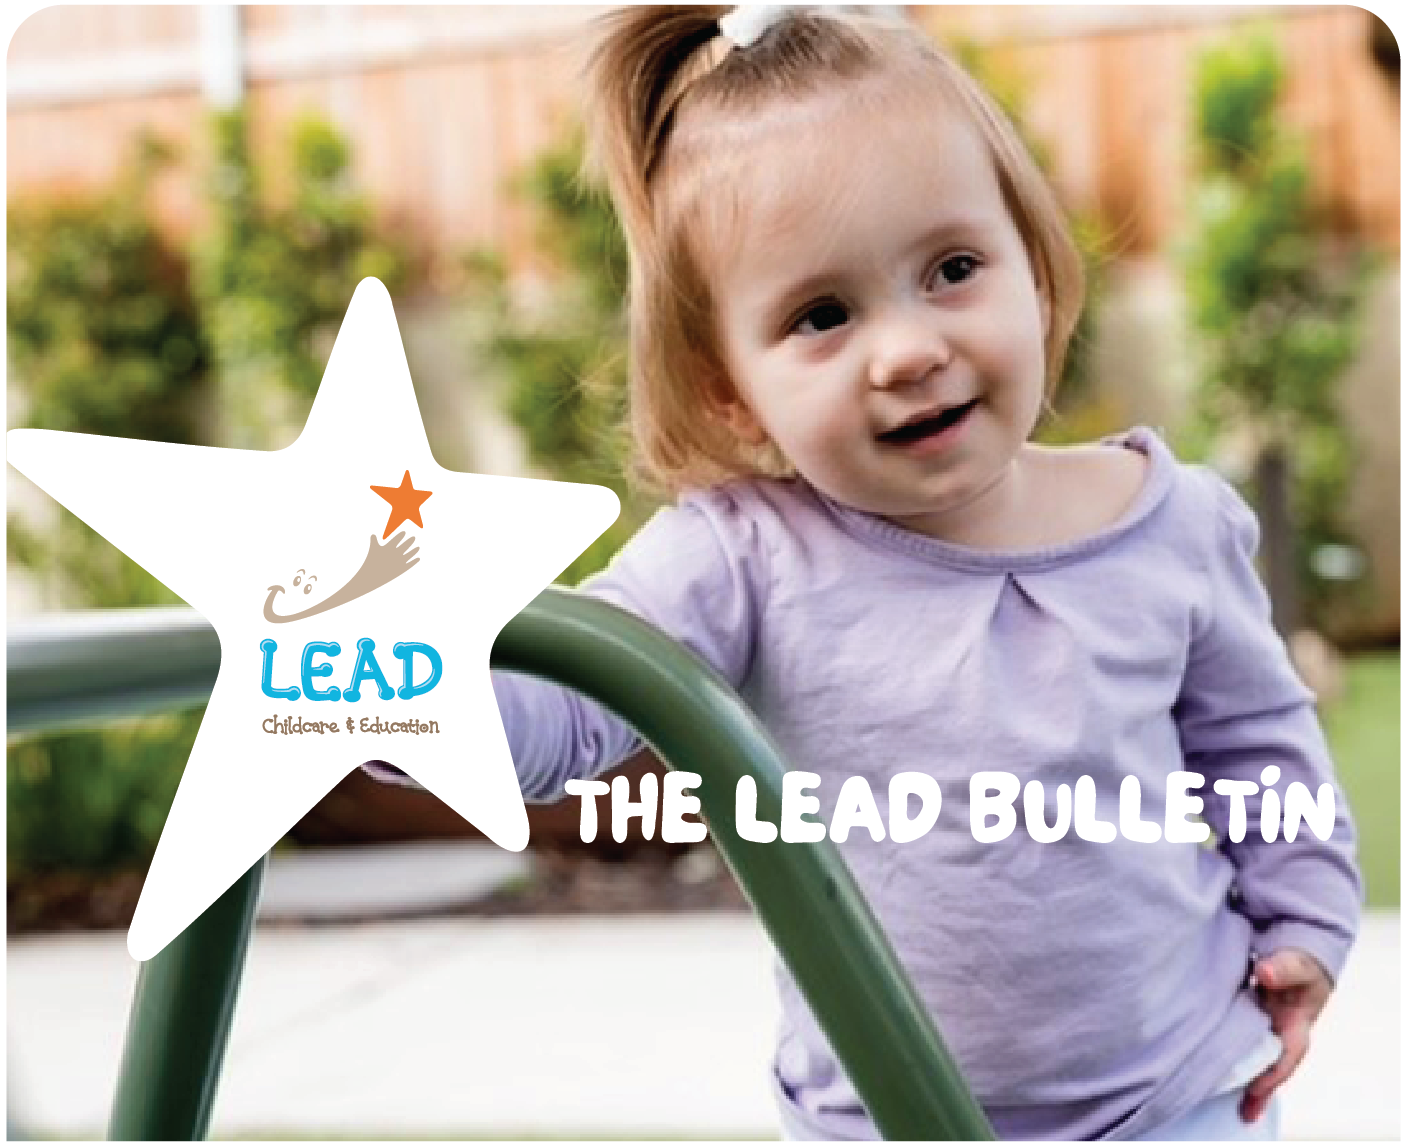 Stay Up-To-Date at LEAD Childcare